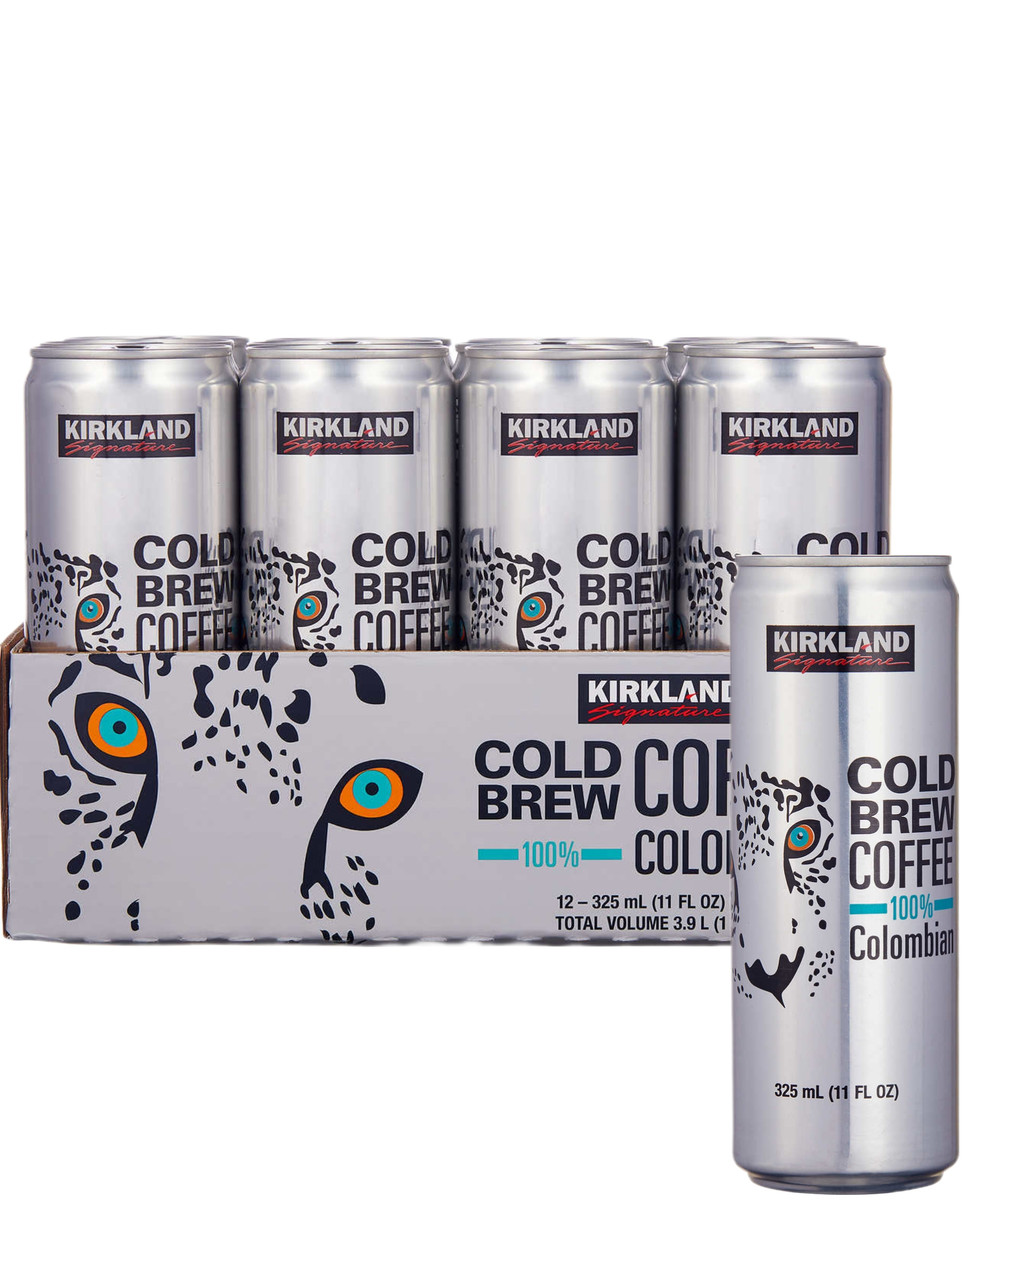 Canned Black Cold Brew Coffee, Lightly Sweetened, 12 Pack